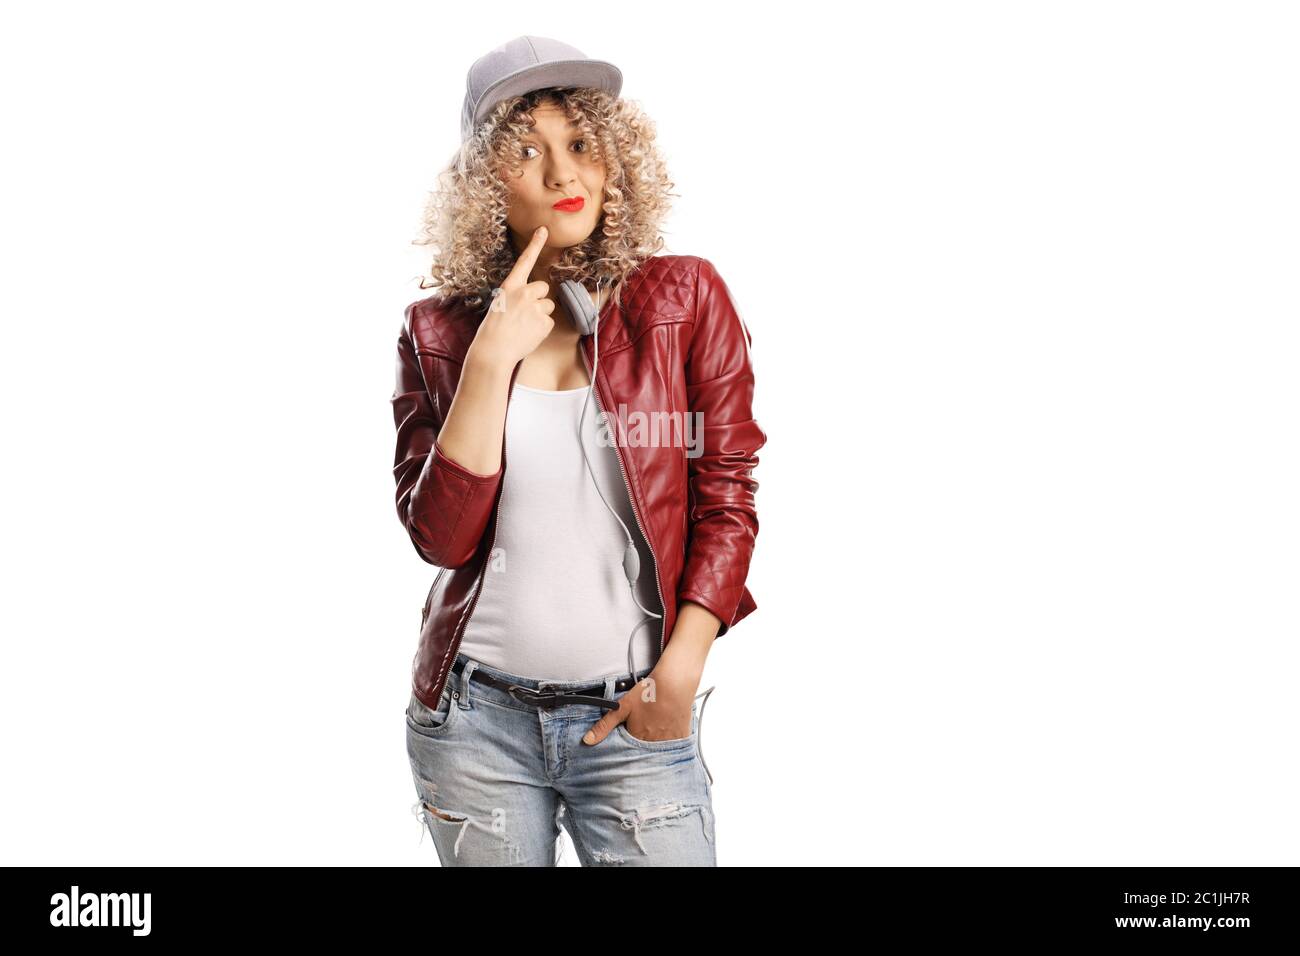 Young woman with a curly blond hair and a cap wearing a red leather jacket with an ignorant expression isolated on white background Stock Photo